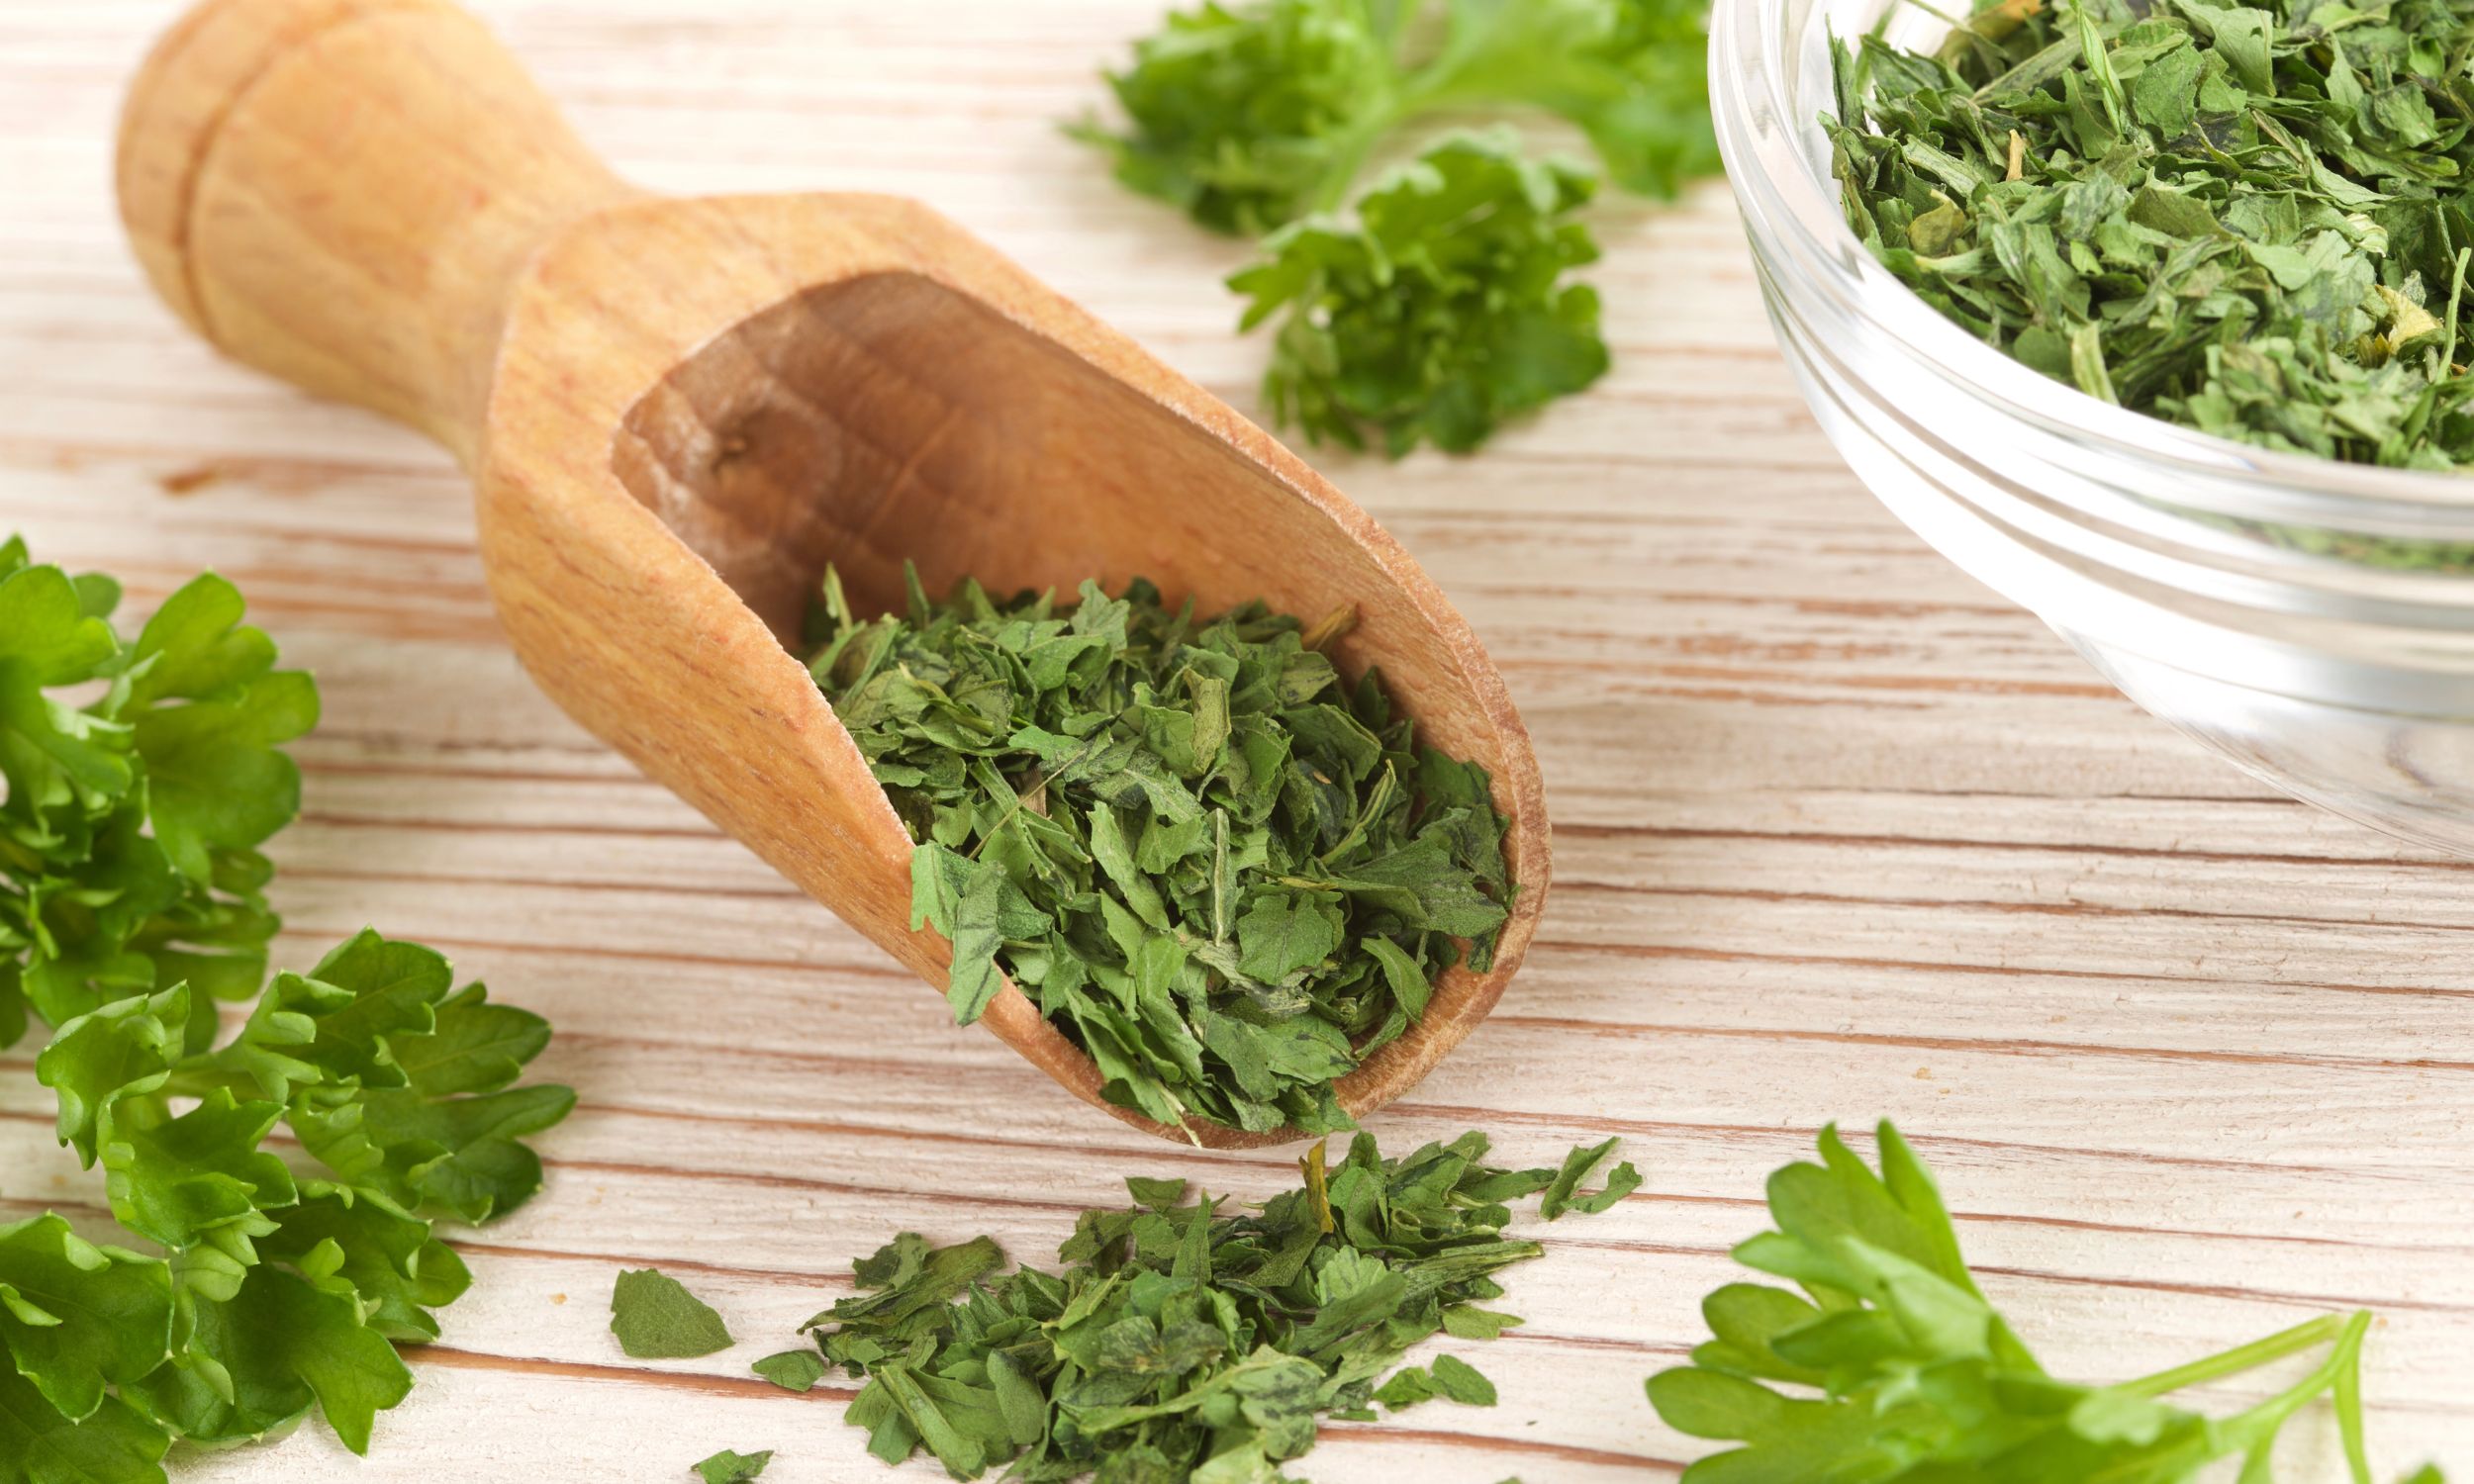 How to Dry Parsley and Store it